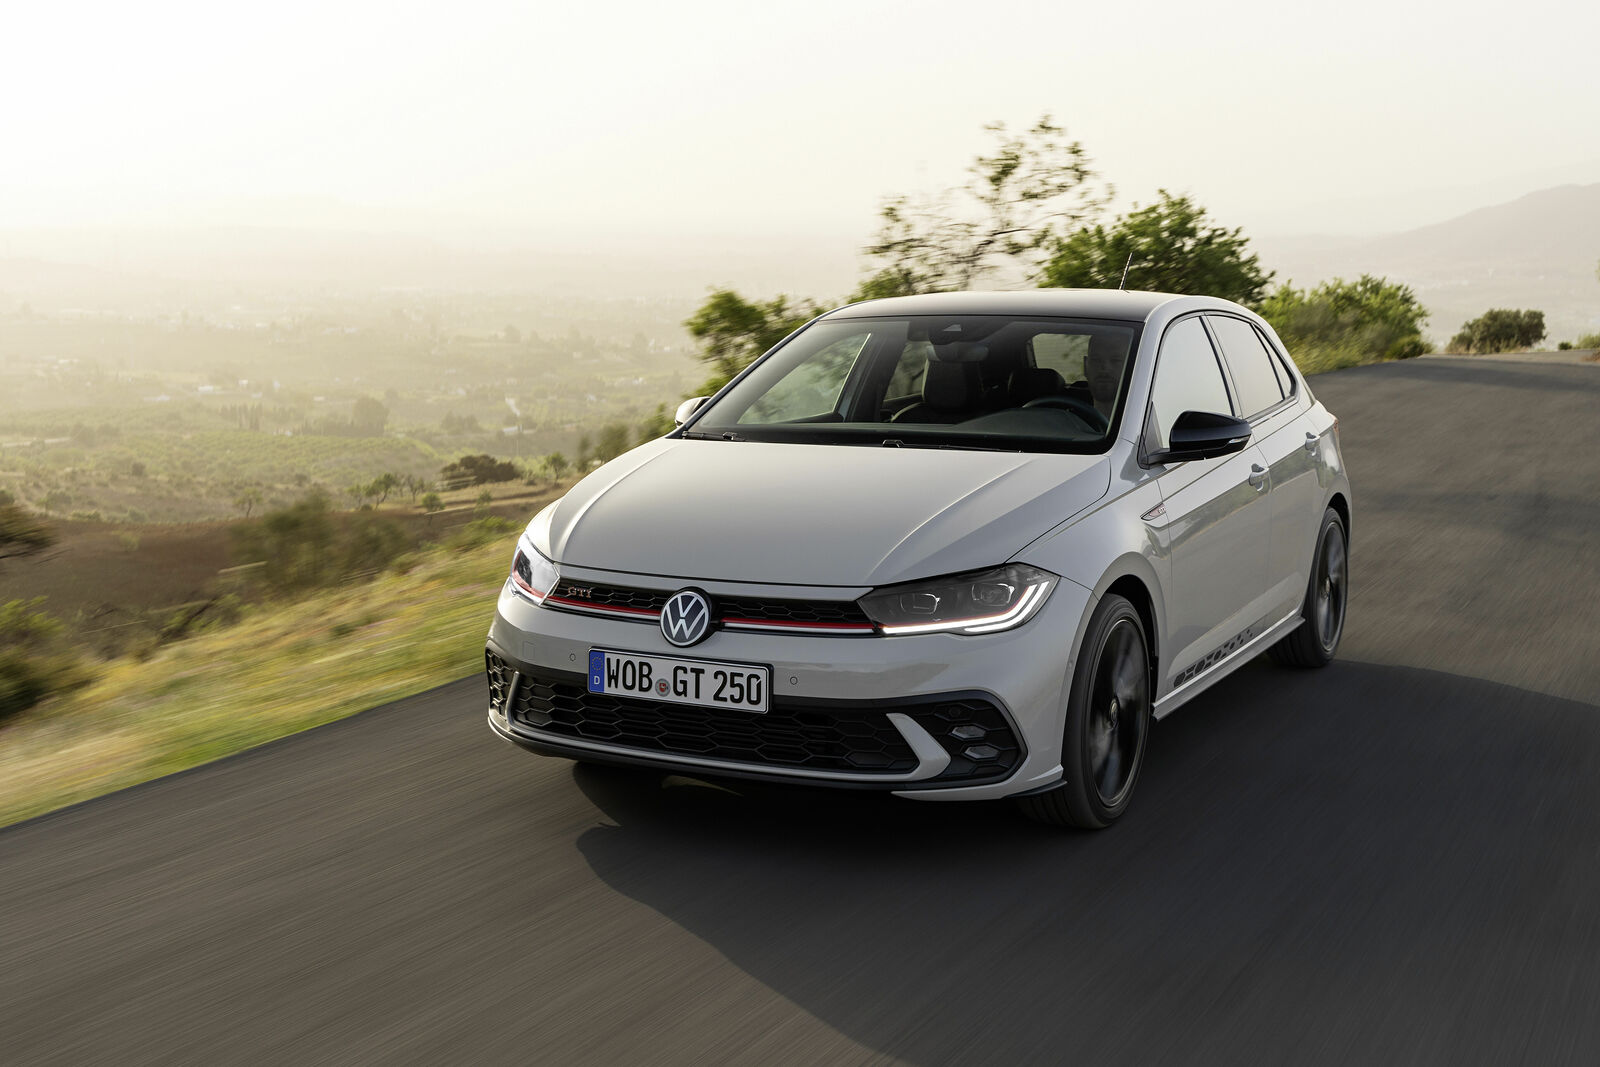 Celebrating the birthday of an icon: Volkswagen presents limited-edition  Polo GTI Edition 25